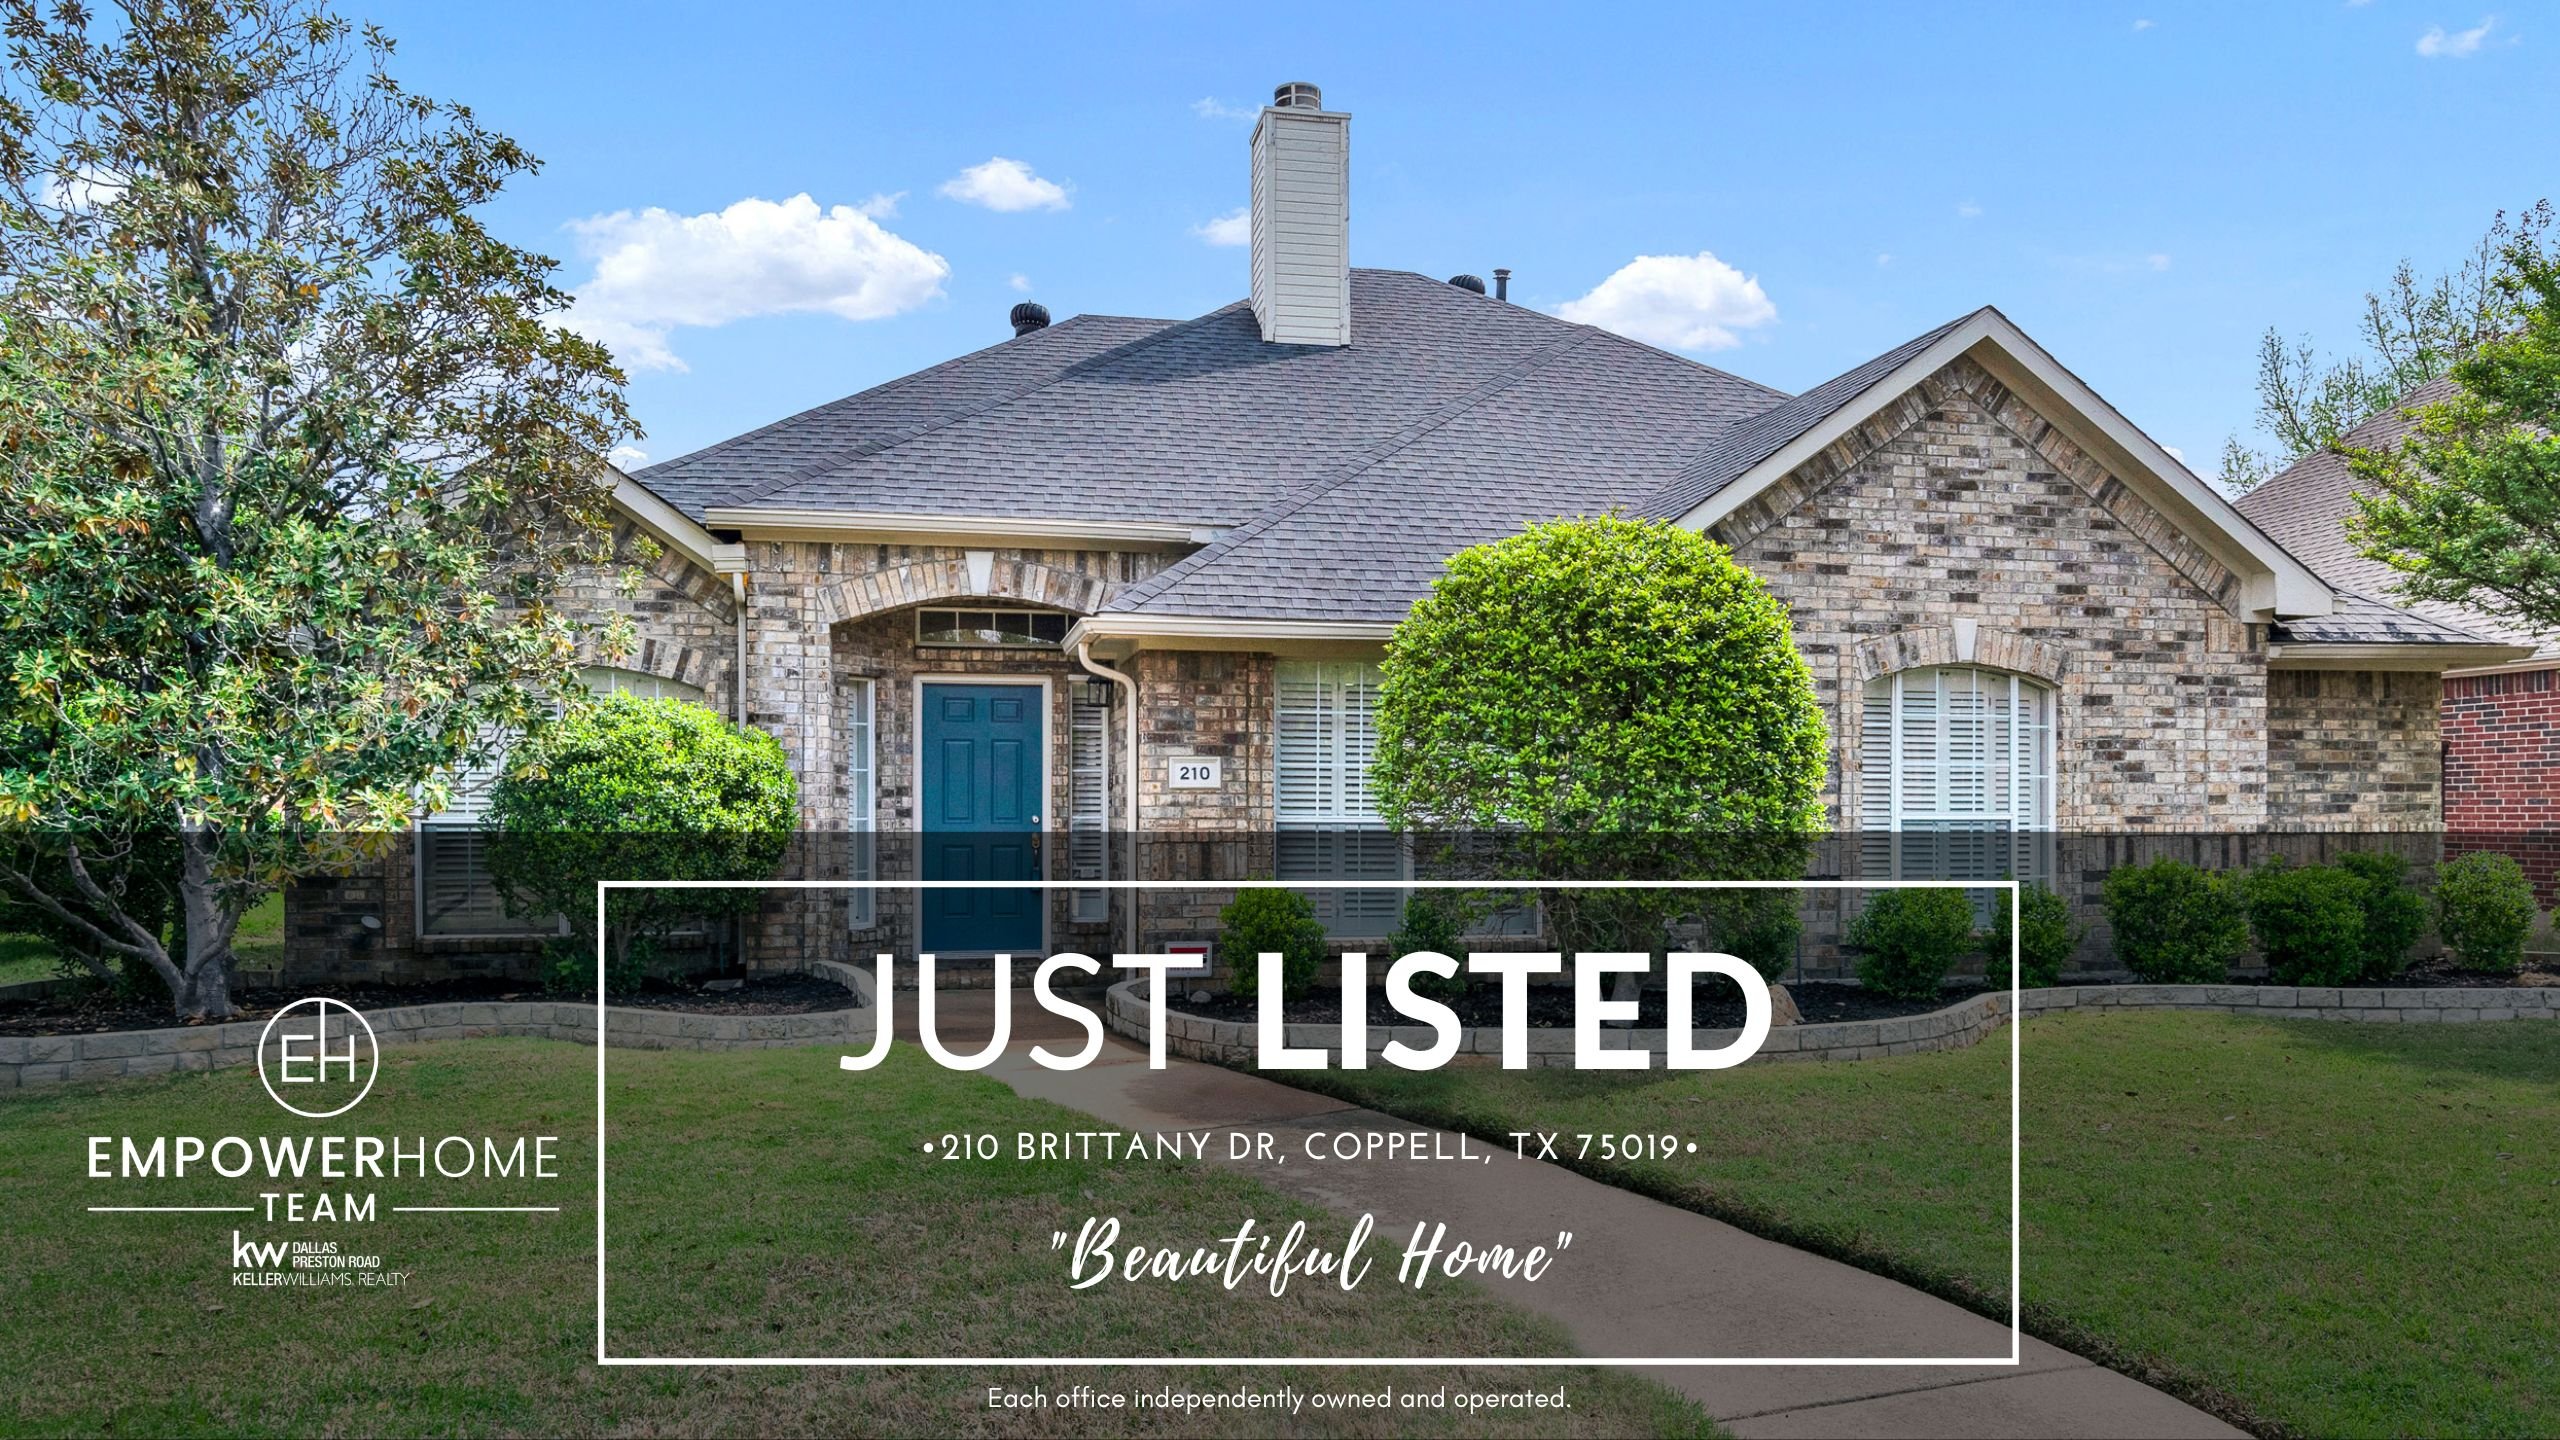 210 Brittany Dr, Coppell, TX 75019